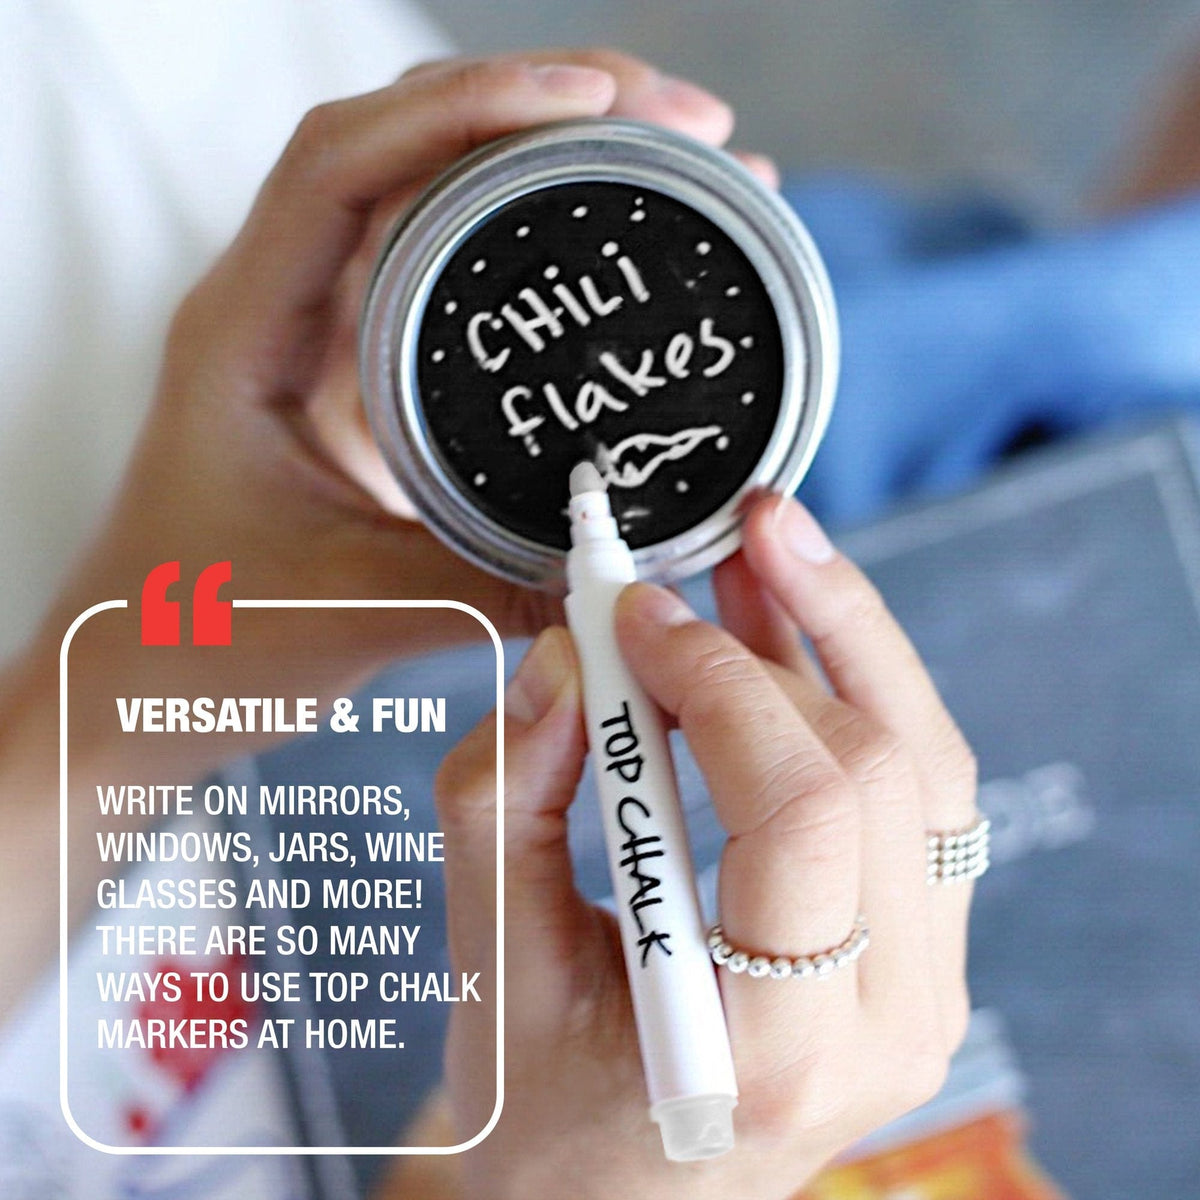 &quot;Chili Flakes&quot; is written on top of the Mason Jar lid Chalk Tops in white Liquid Chalk Marker with the words: &quot;Versatile and fun. Write on mirrors, windows, jars, wine glasses, and more! There are so many ways to use top chalk markers at home.&quot;